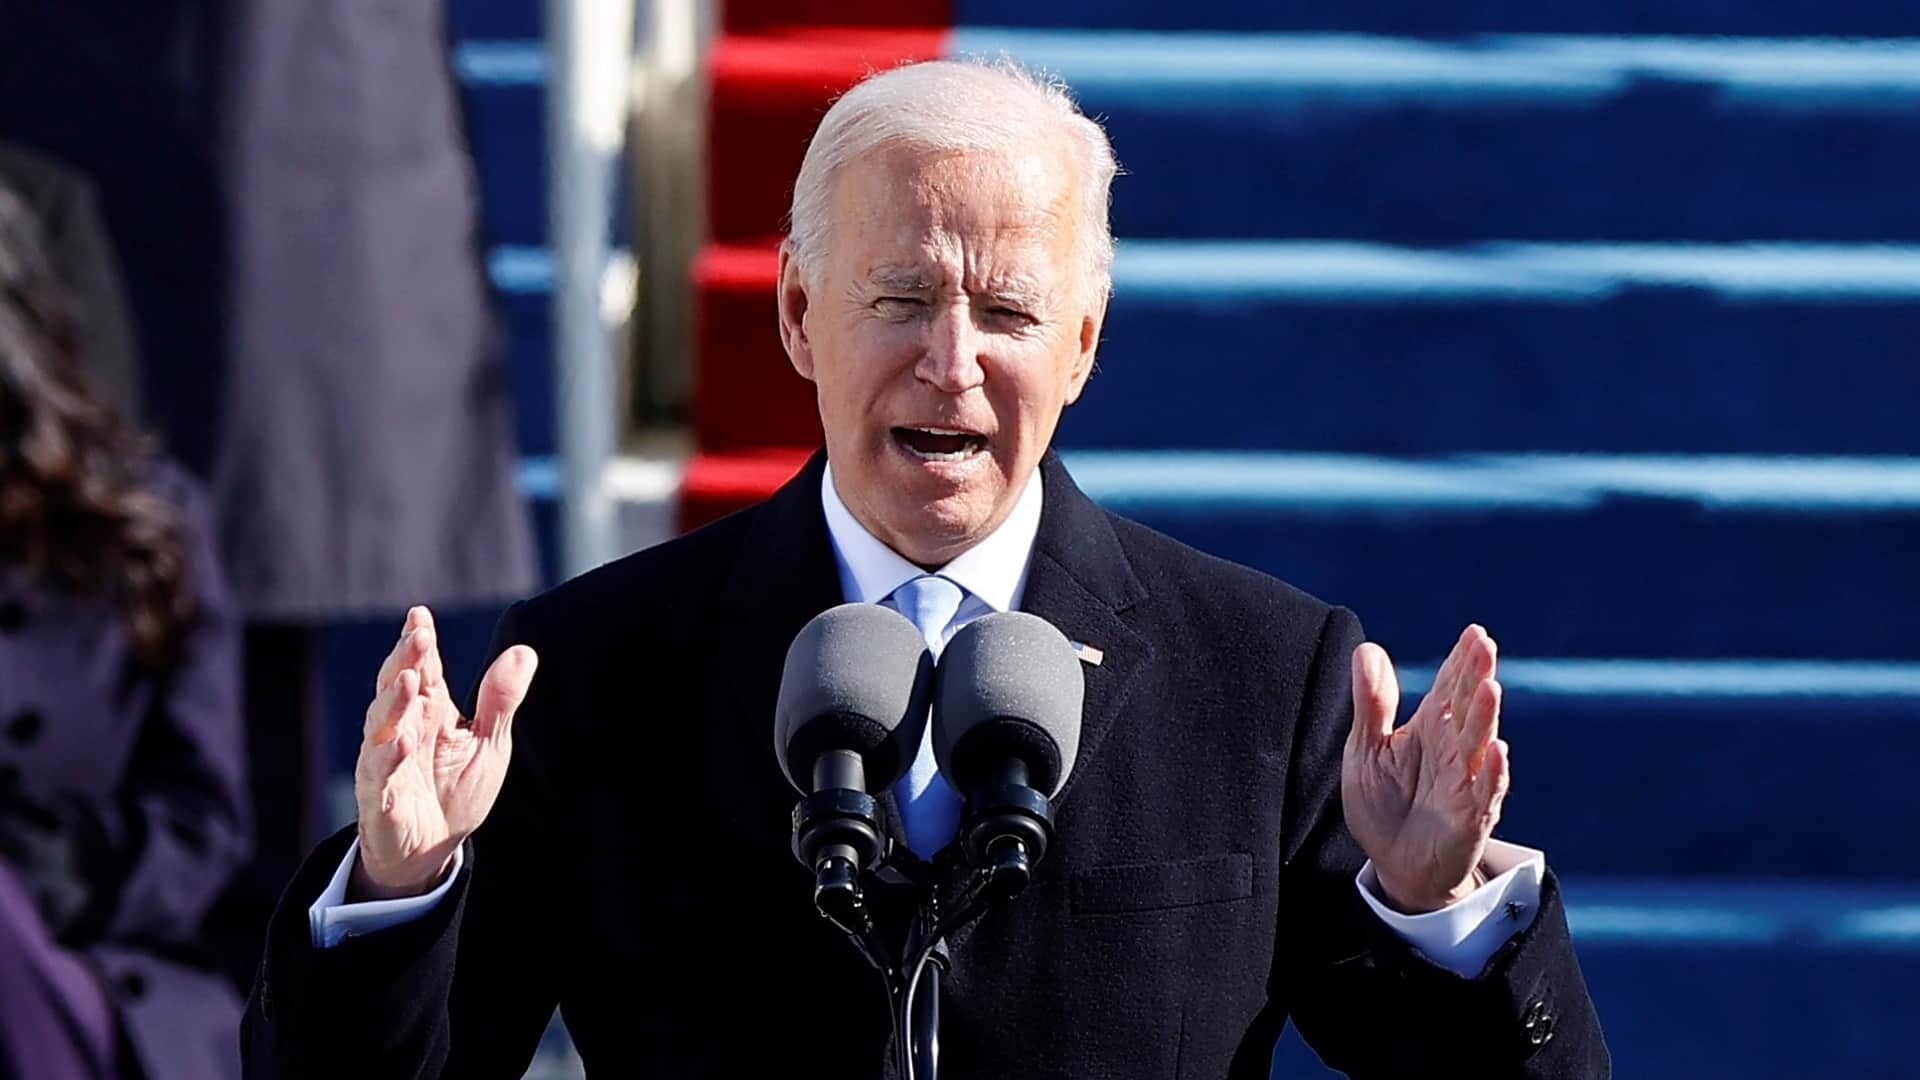 Joe Biden: Played an active role in the Obama administration. 1920x1080 Full HD Wallpaper.